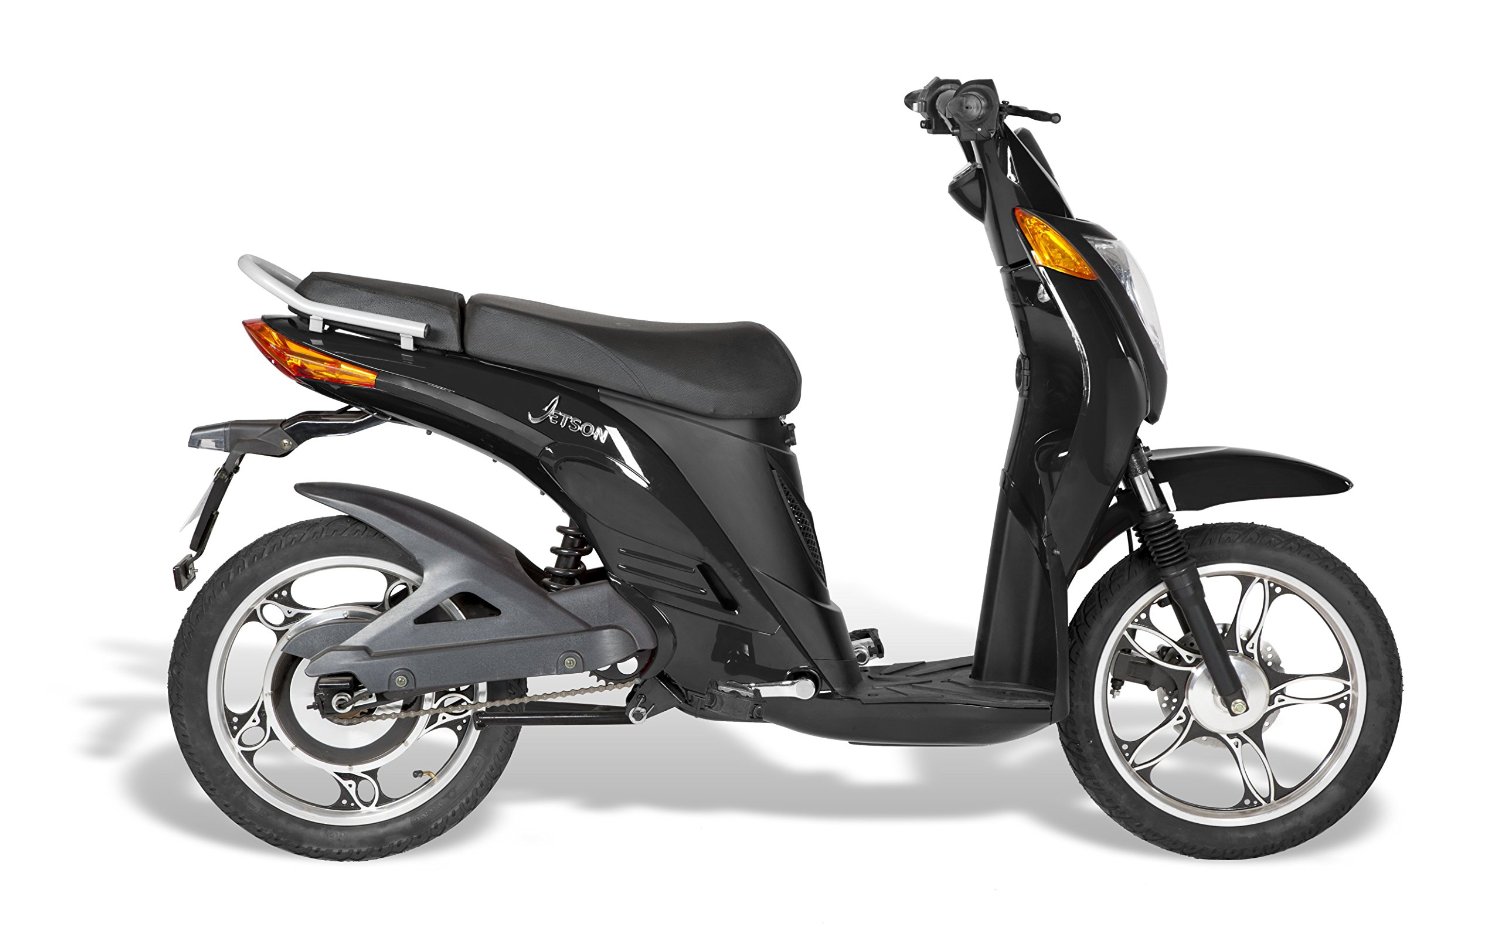 Jetson Lithium Ion Powered Eco-Friendly Electric Bike by Jetson